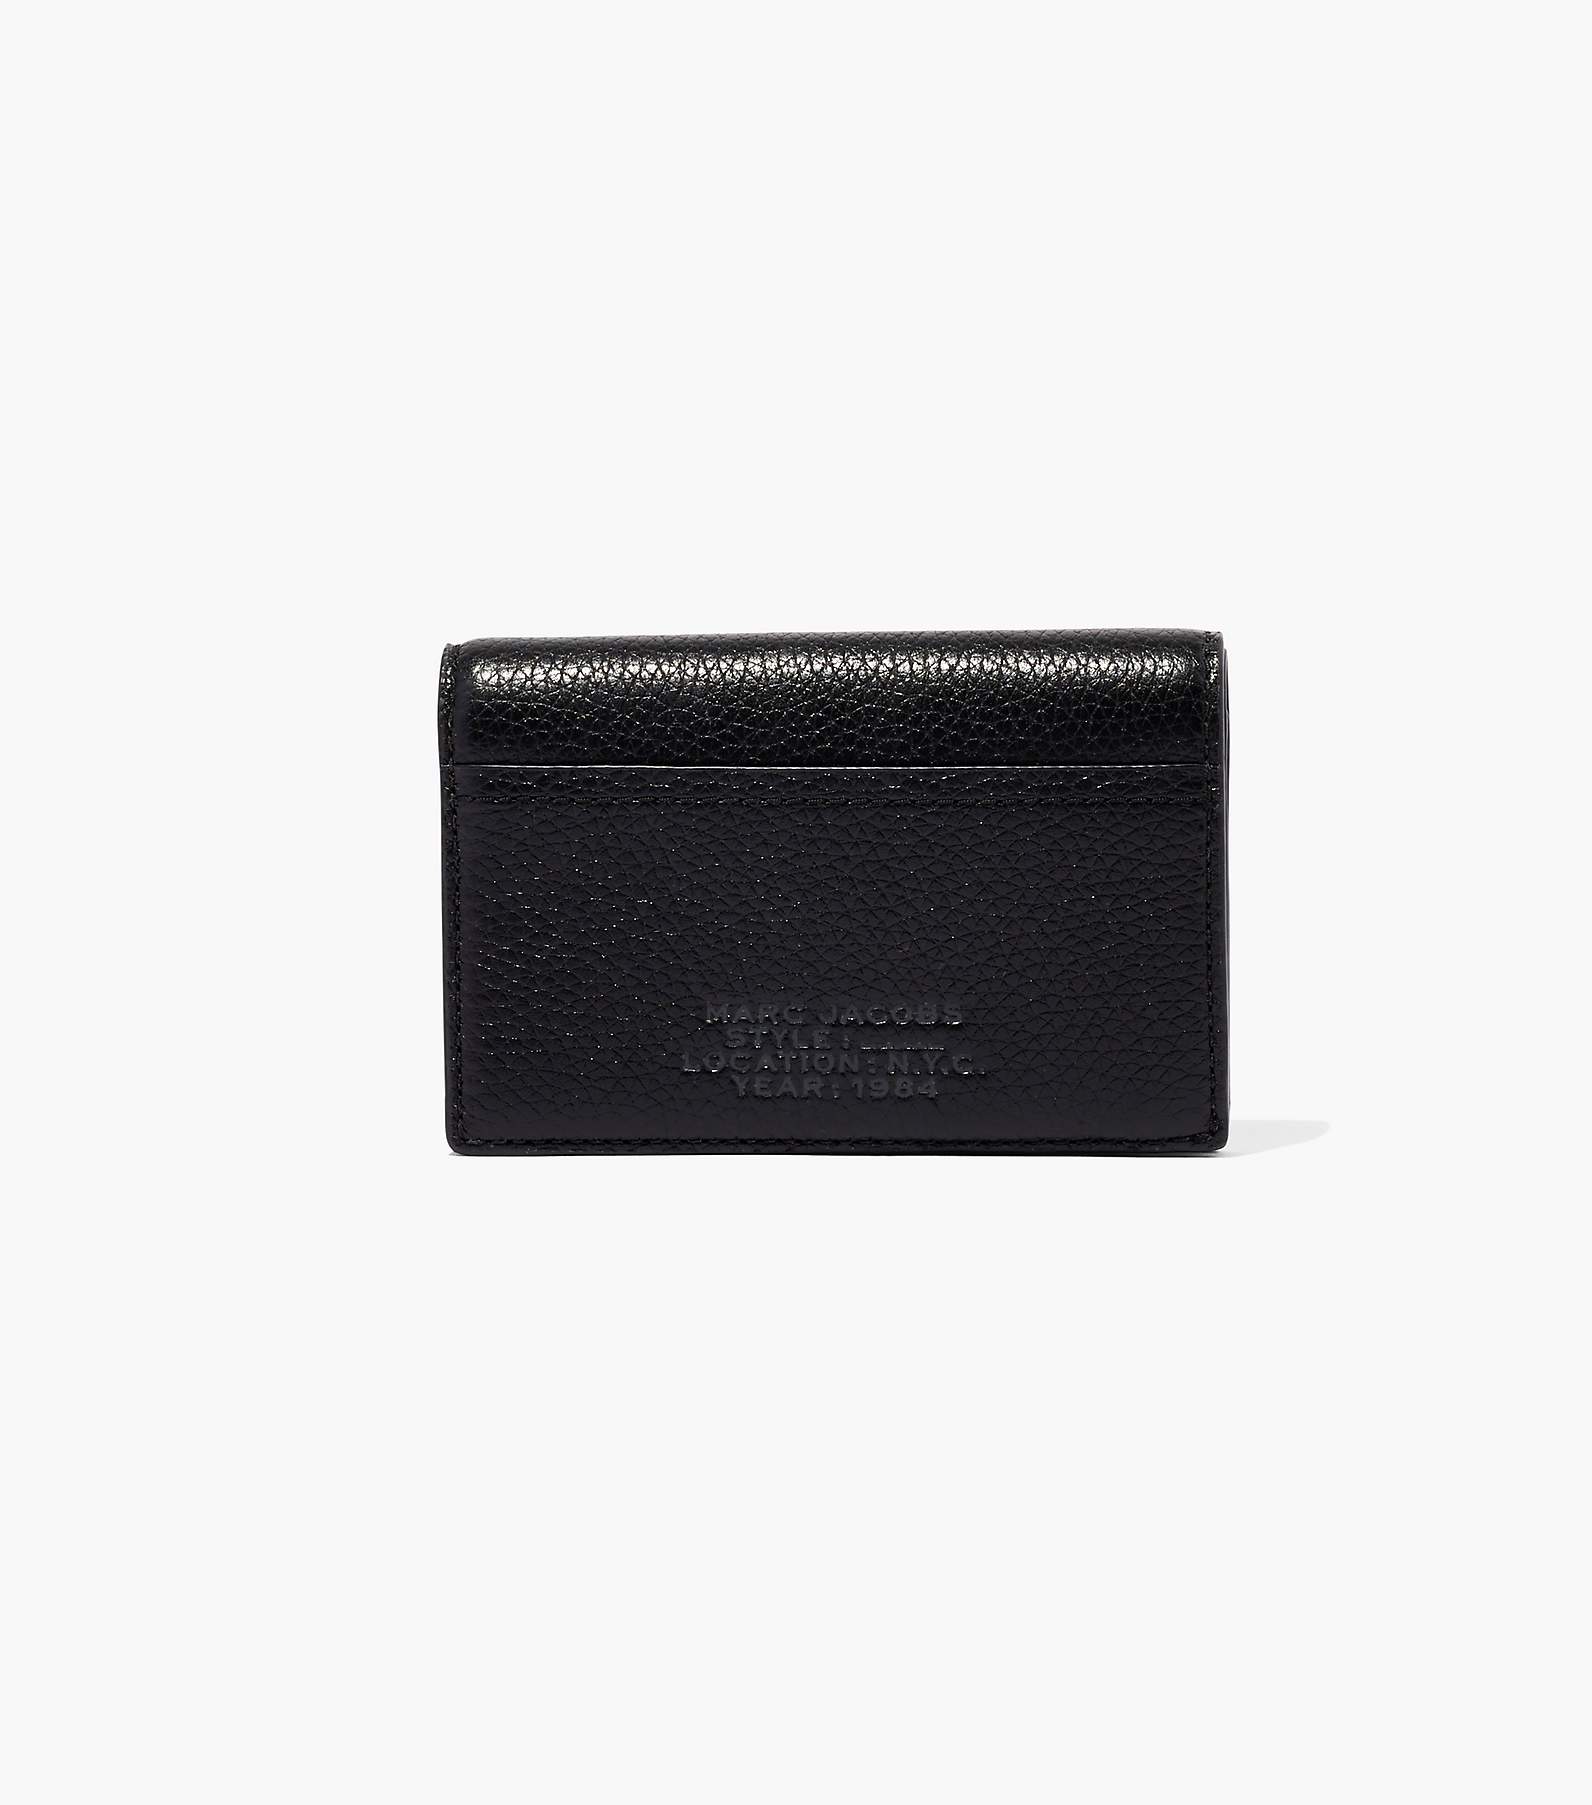 Authentic Marc By Marc Jacobs Leather Card Holder  Card holder leather, Marc  jacobs leather, Leather